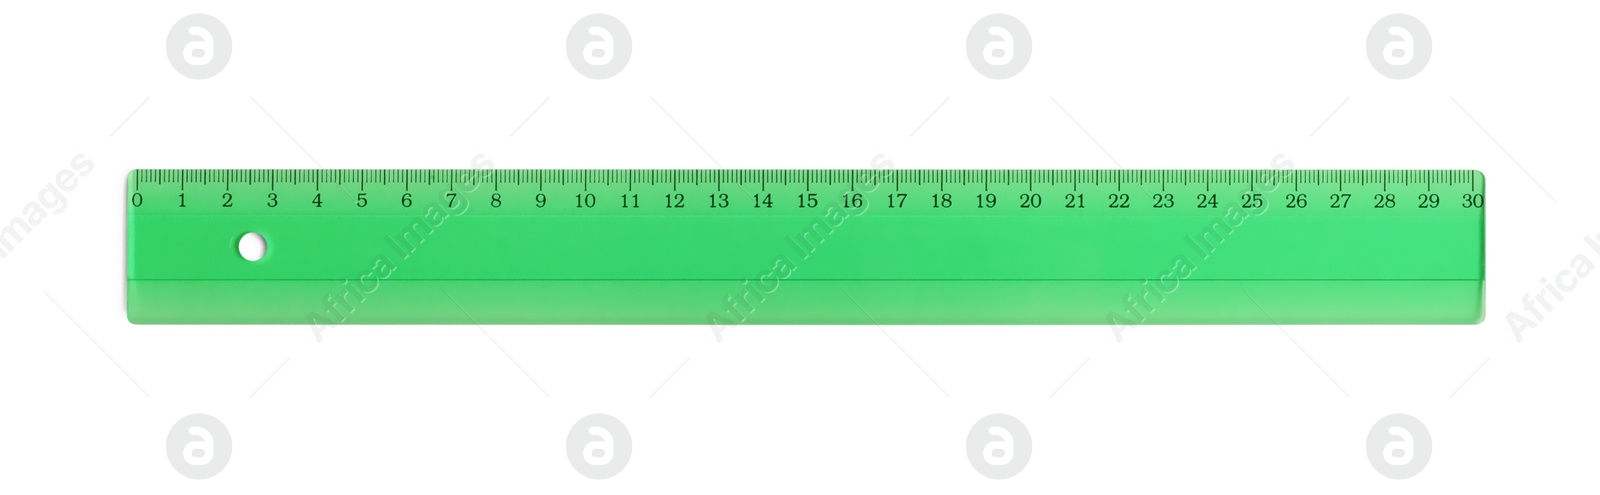 Photo of Ruler with measuring length markings in centimeters isolated on white, top view